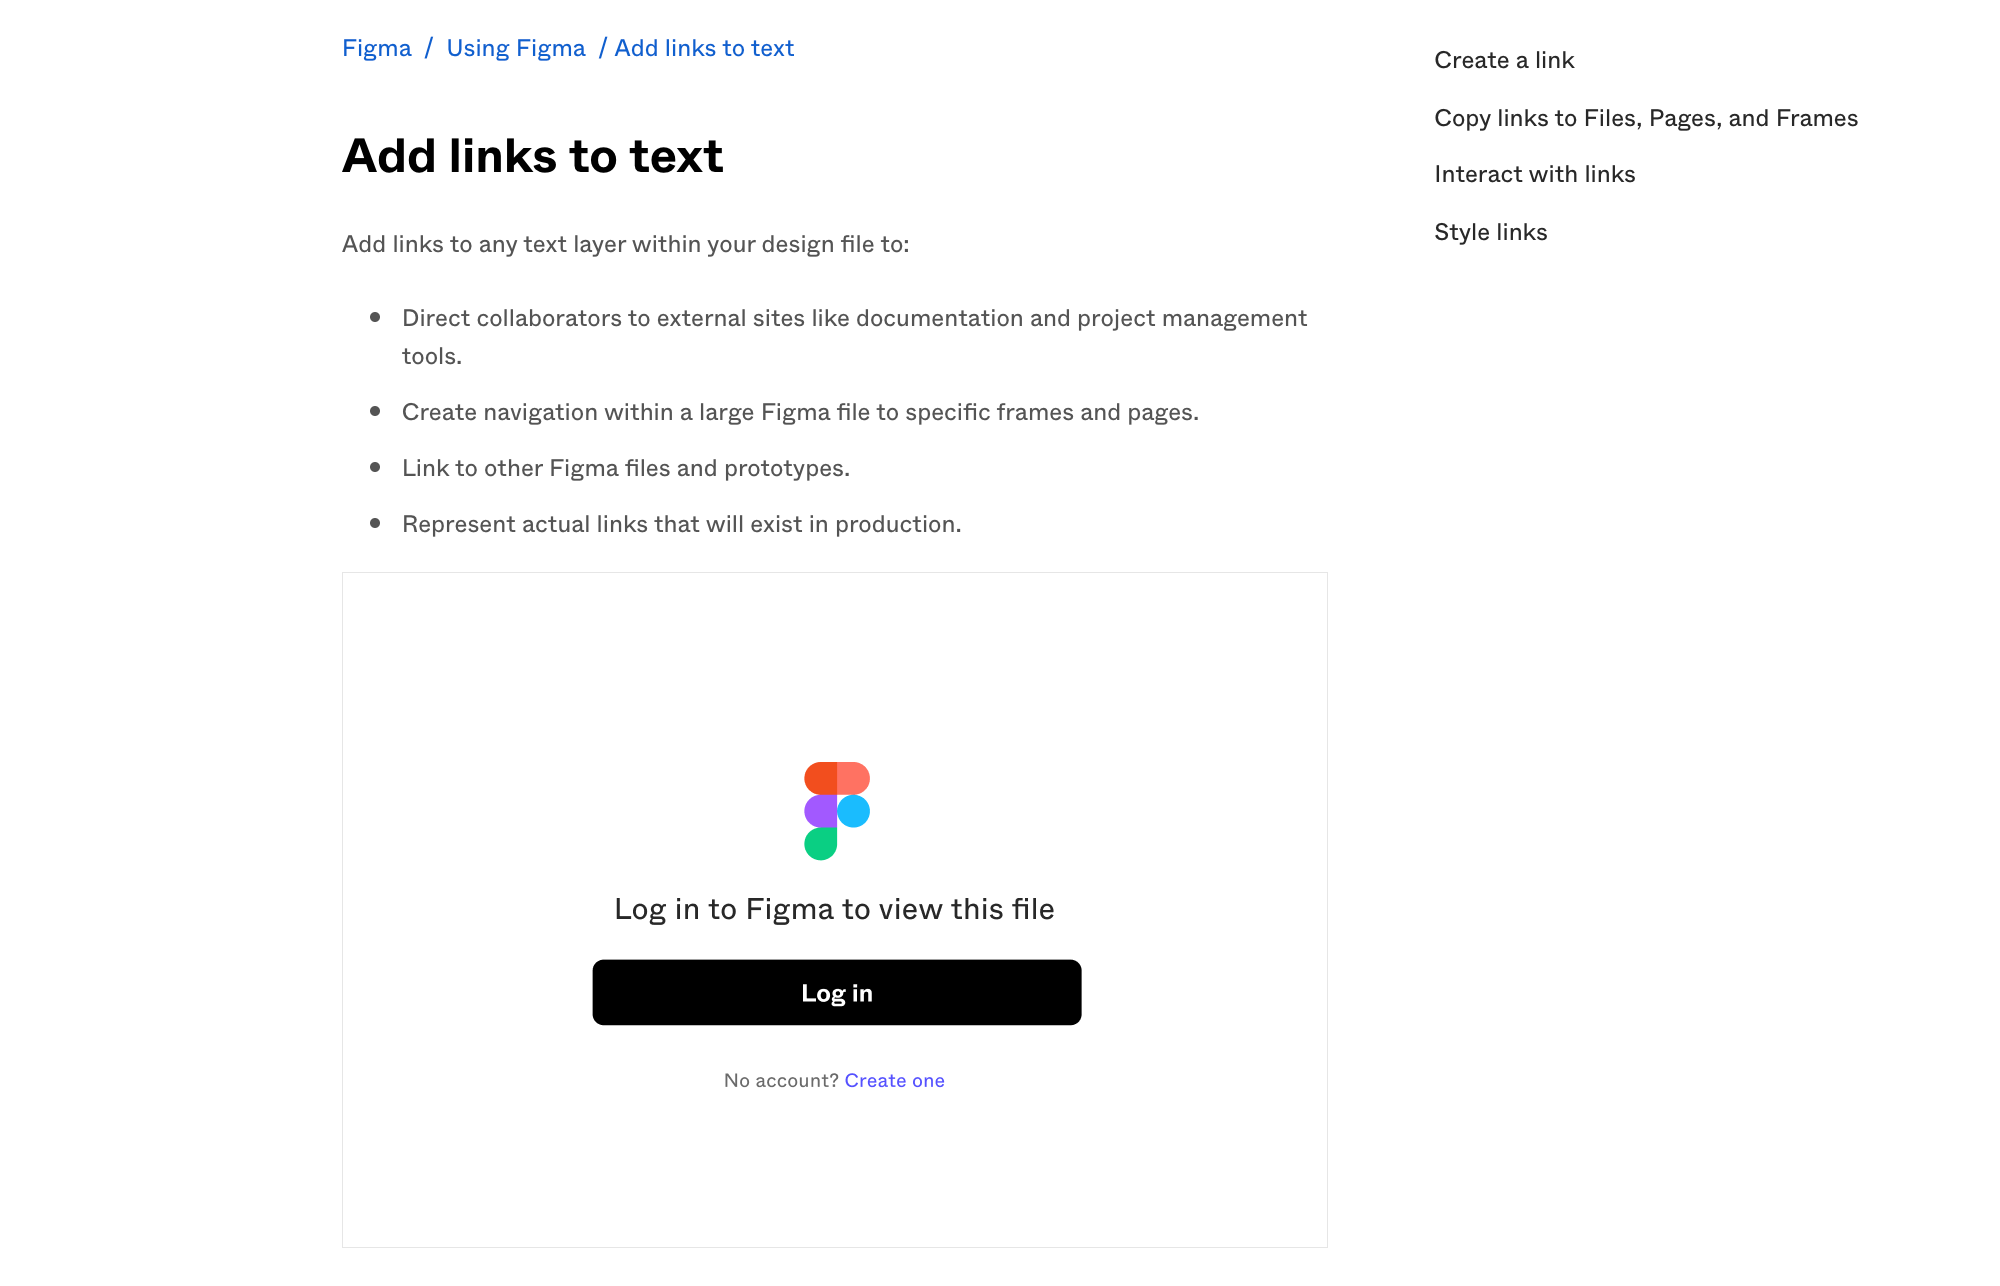 Image showing an embed in an article with a prompt to log in to Figma to view